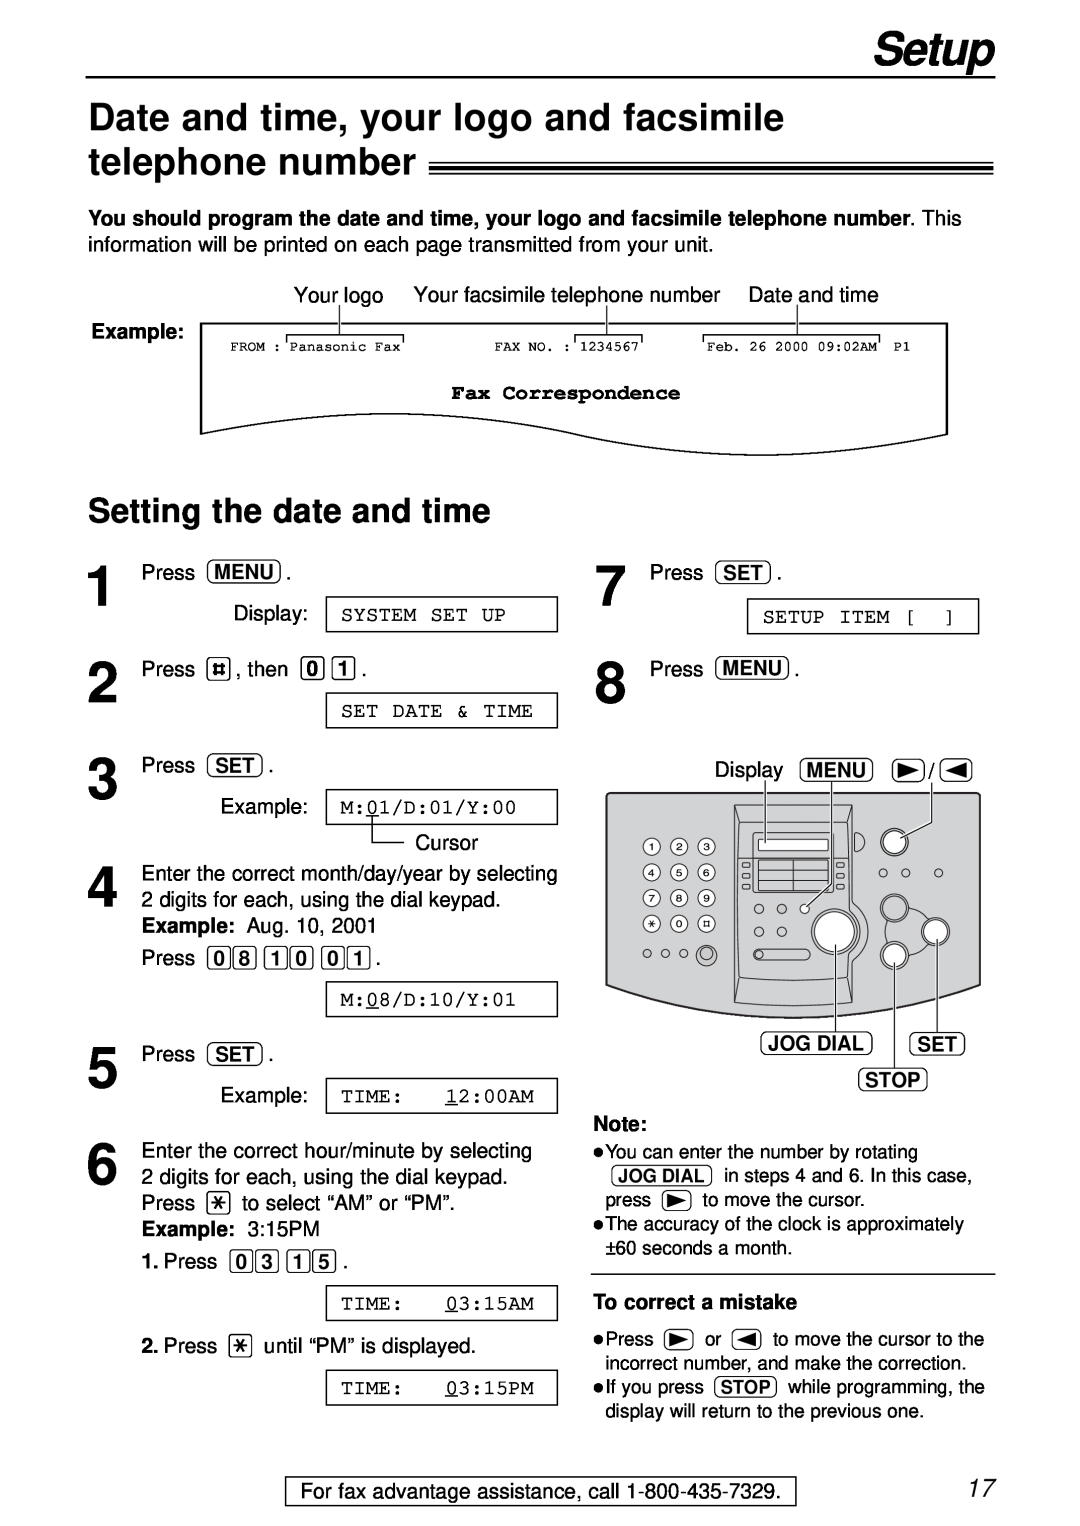 Panasonic KX-FL501 Date and time, your logo and facsimile telephone number, Setting the date and time, Setup, Example 